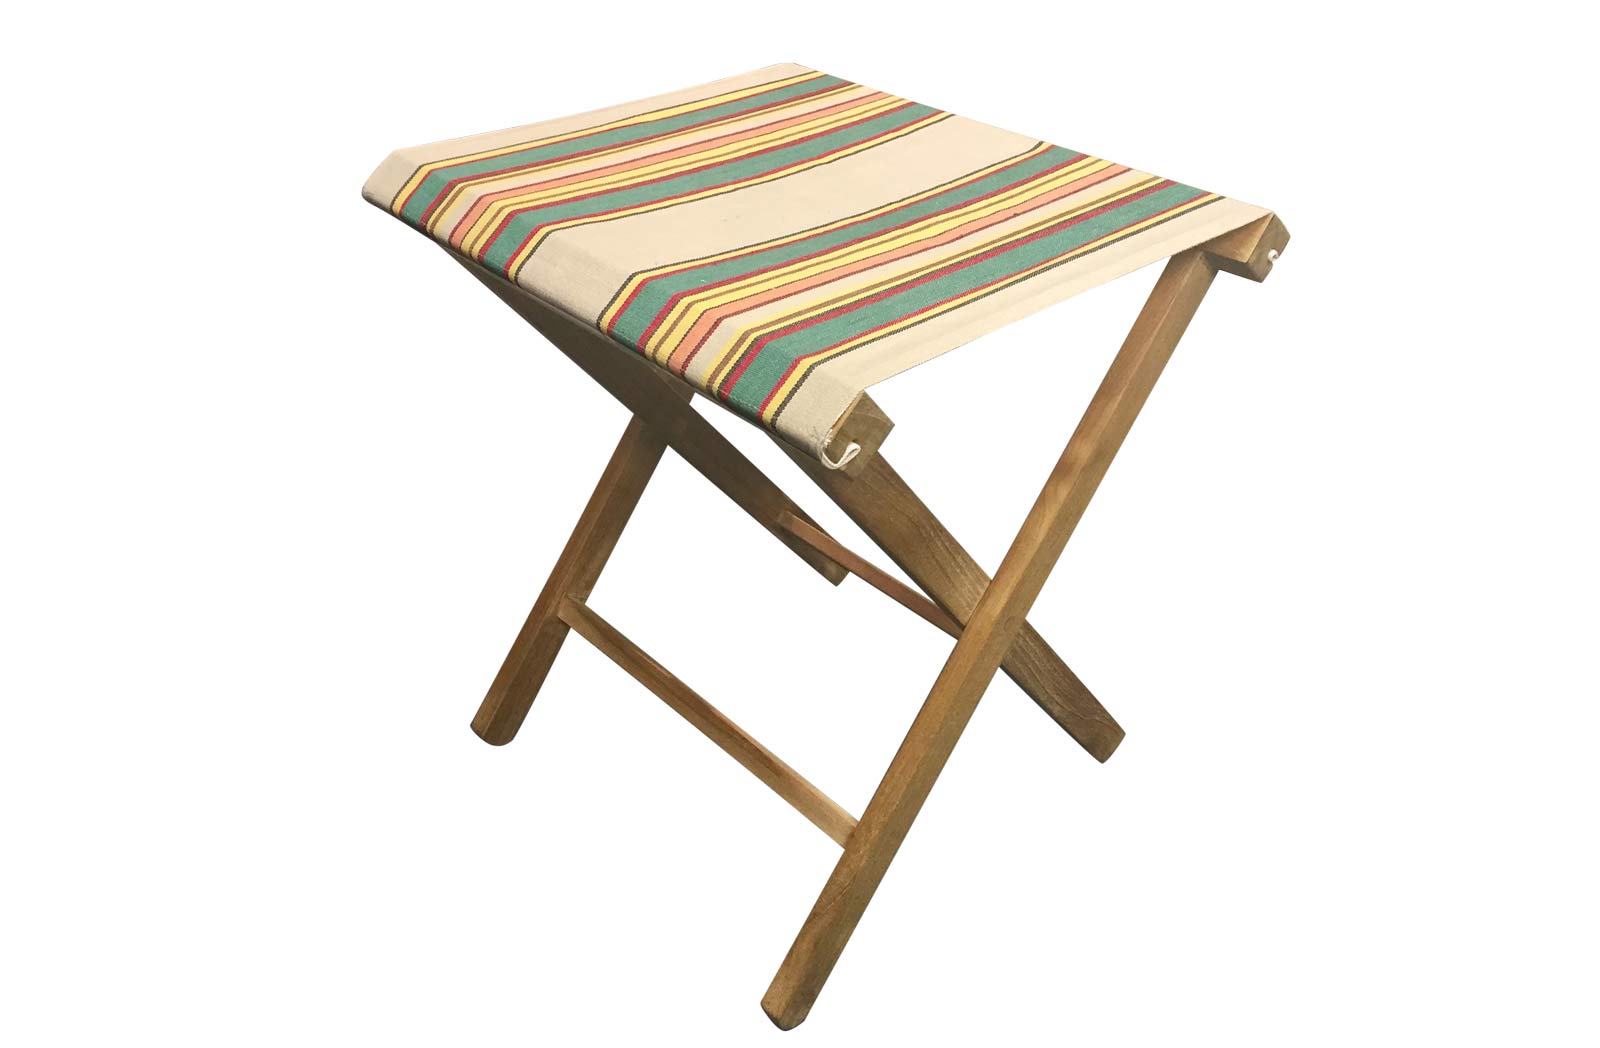 Portable Folding Stool with vintage look striped seat